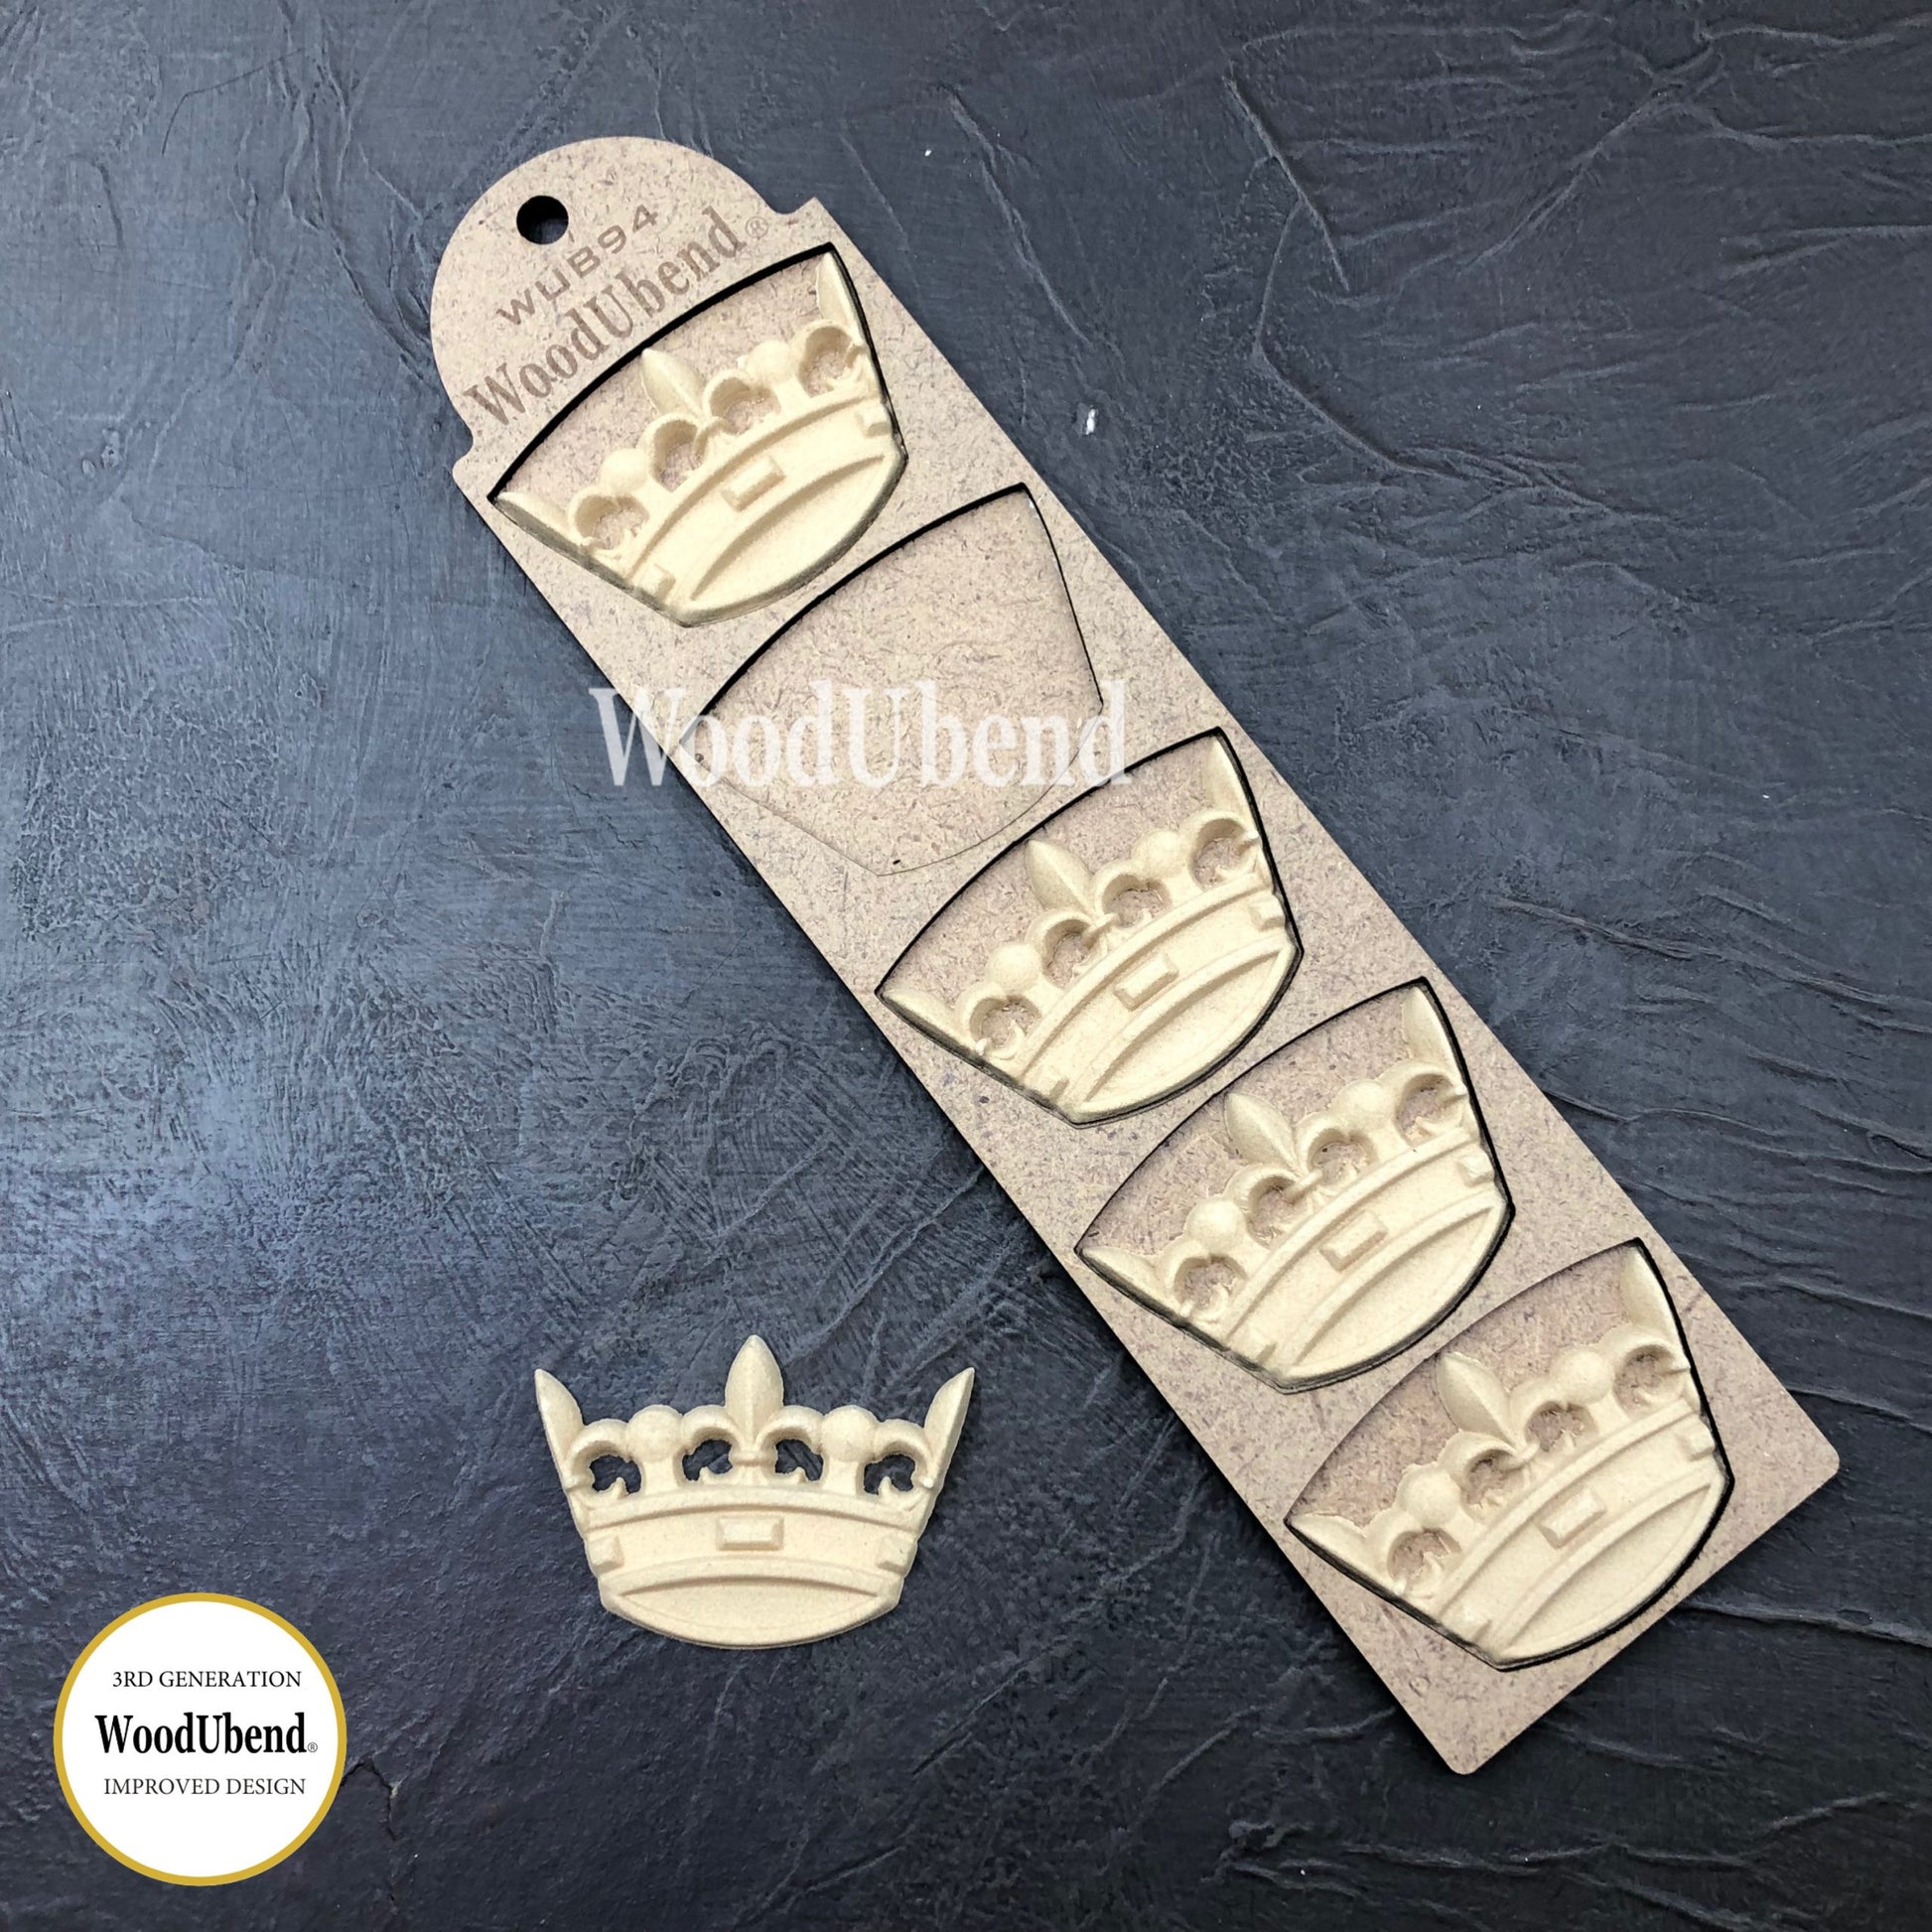 Crowns 7x5cm From WoodUBend (pack of 5 or sold individually)  WUB0094 - Da Vinci Chalk Paint & Rustic home decor